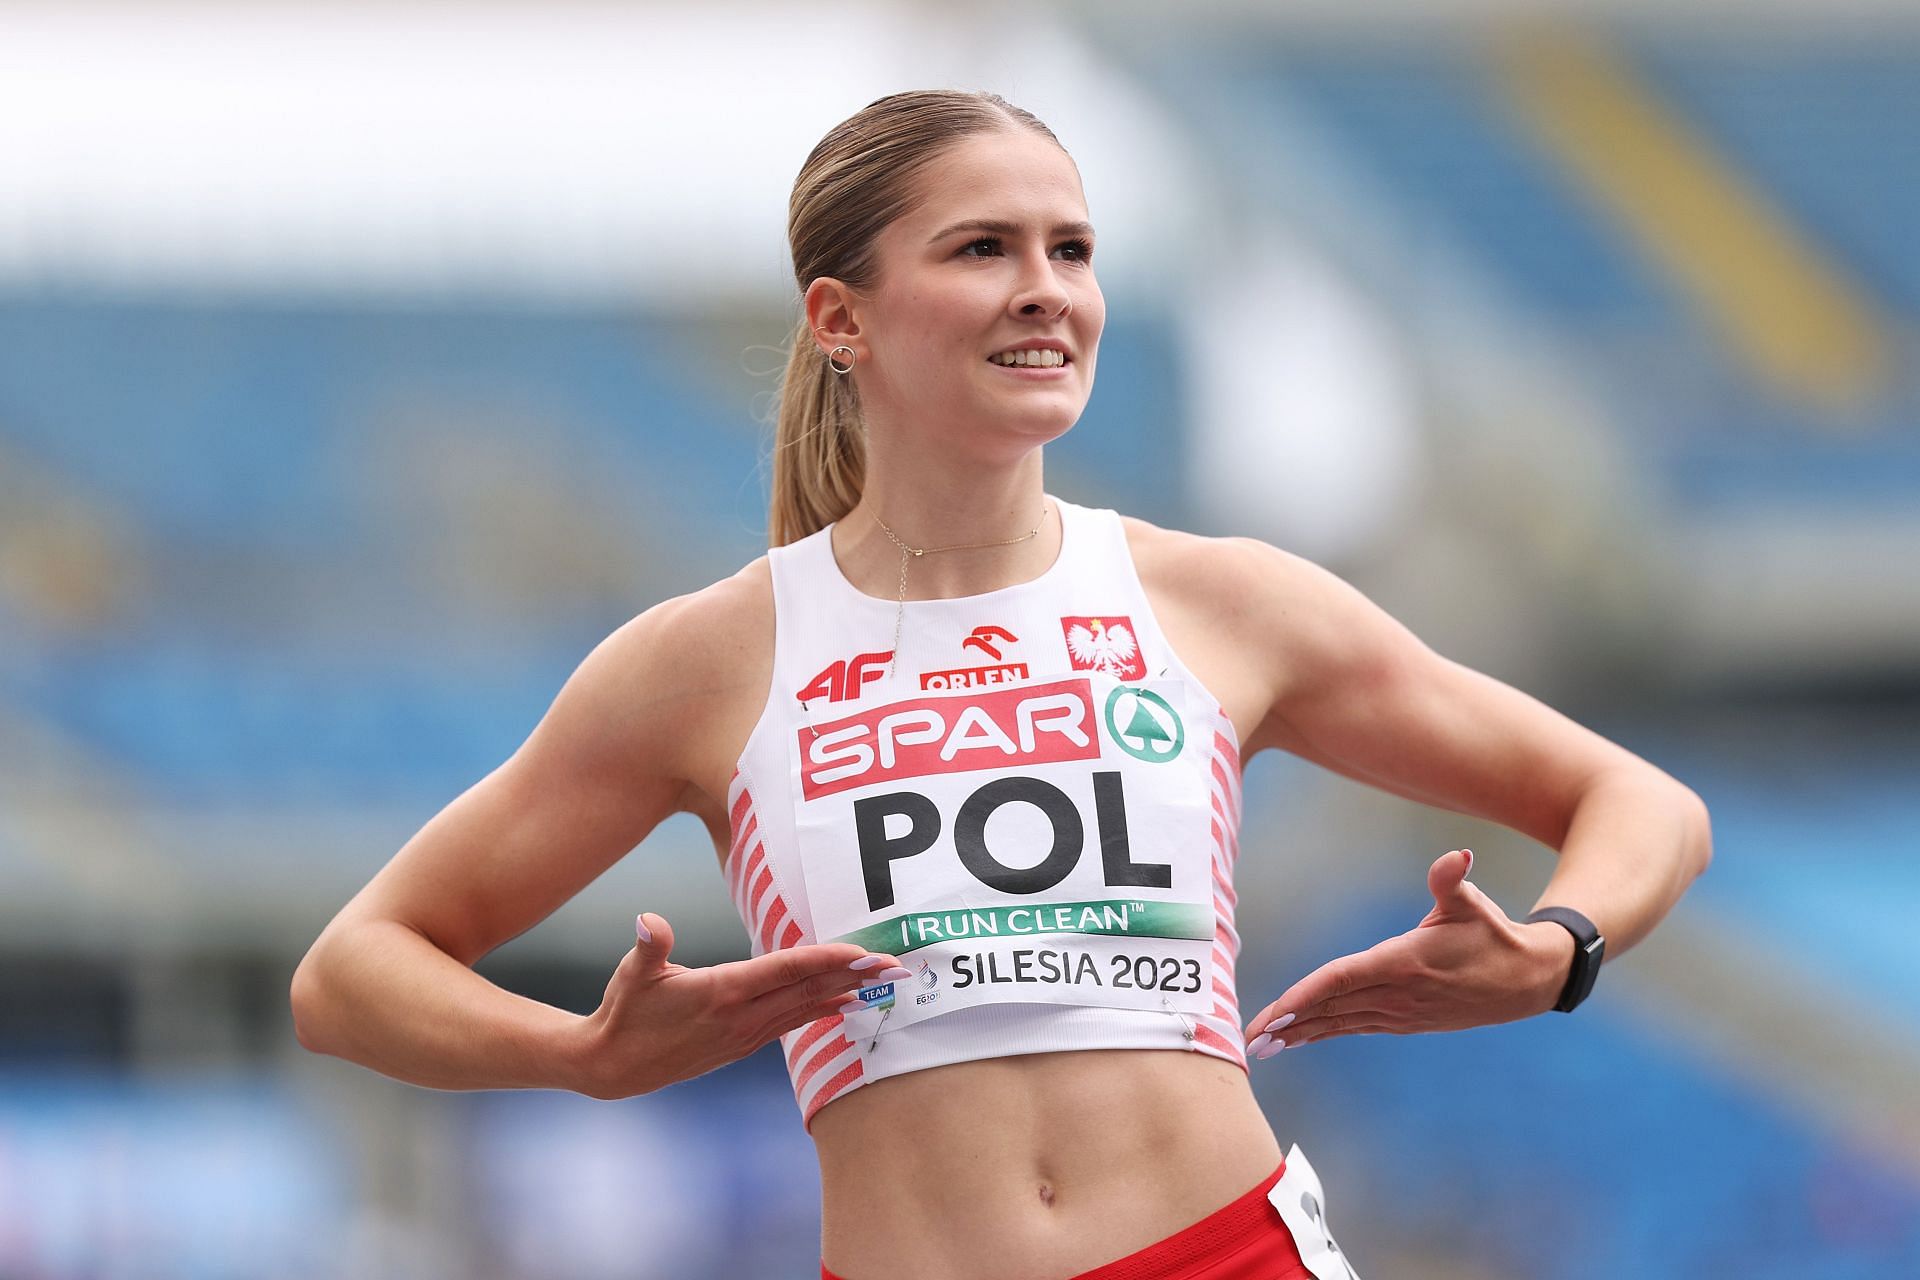 Pia Skrzyszowska will be a crowd favorite at the meet. (Photo by Dean Mouhtaropoulos/Getty Images)